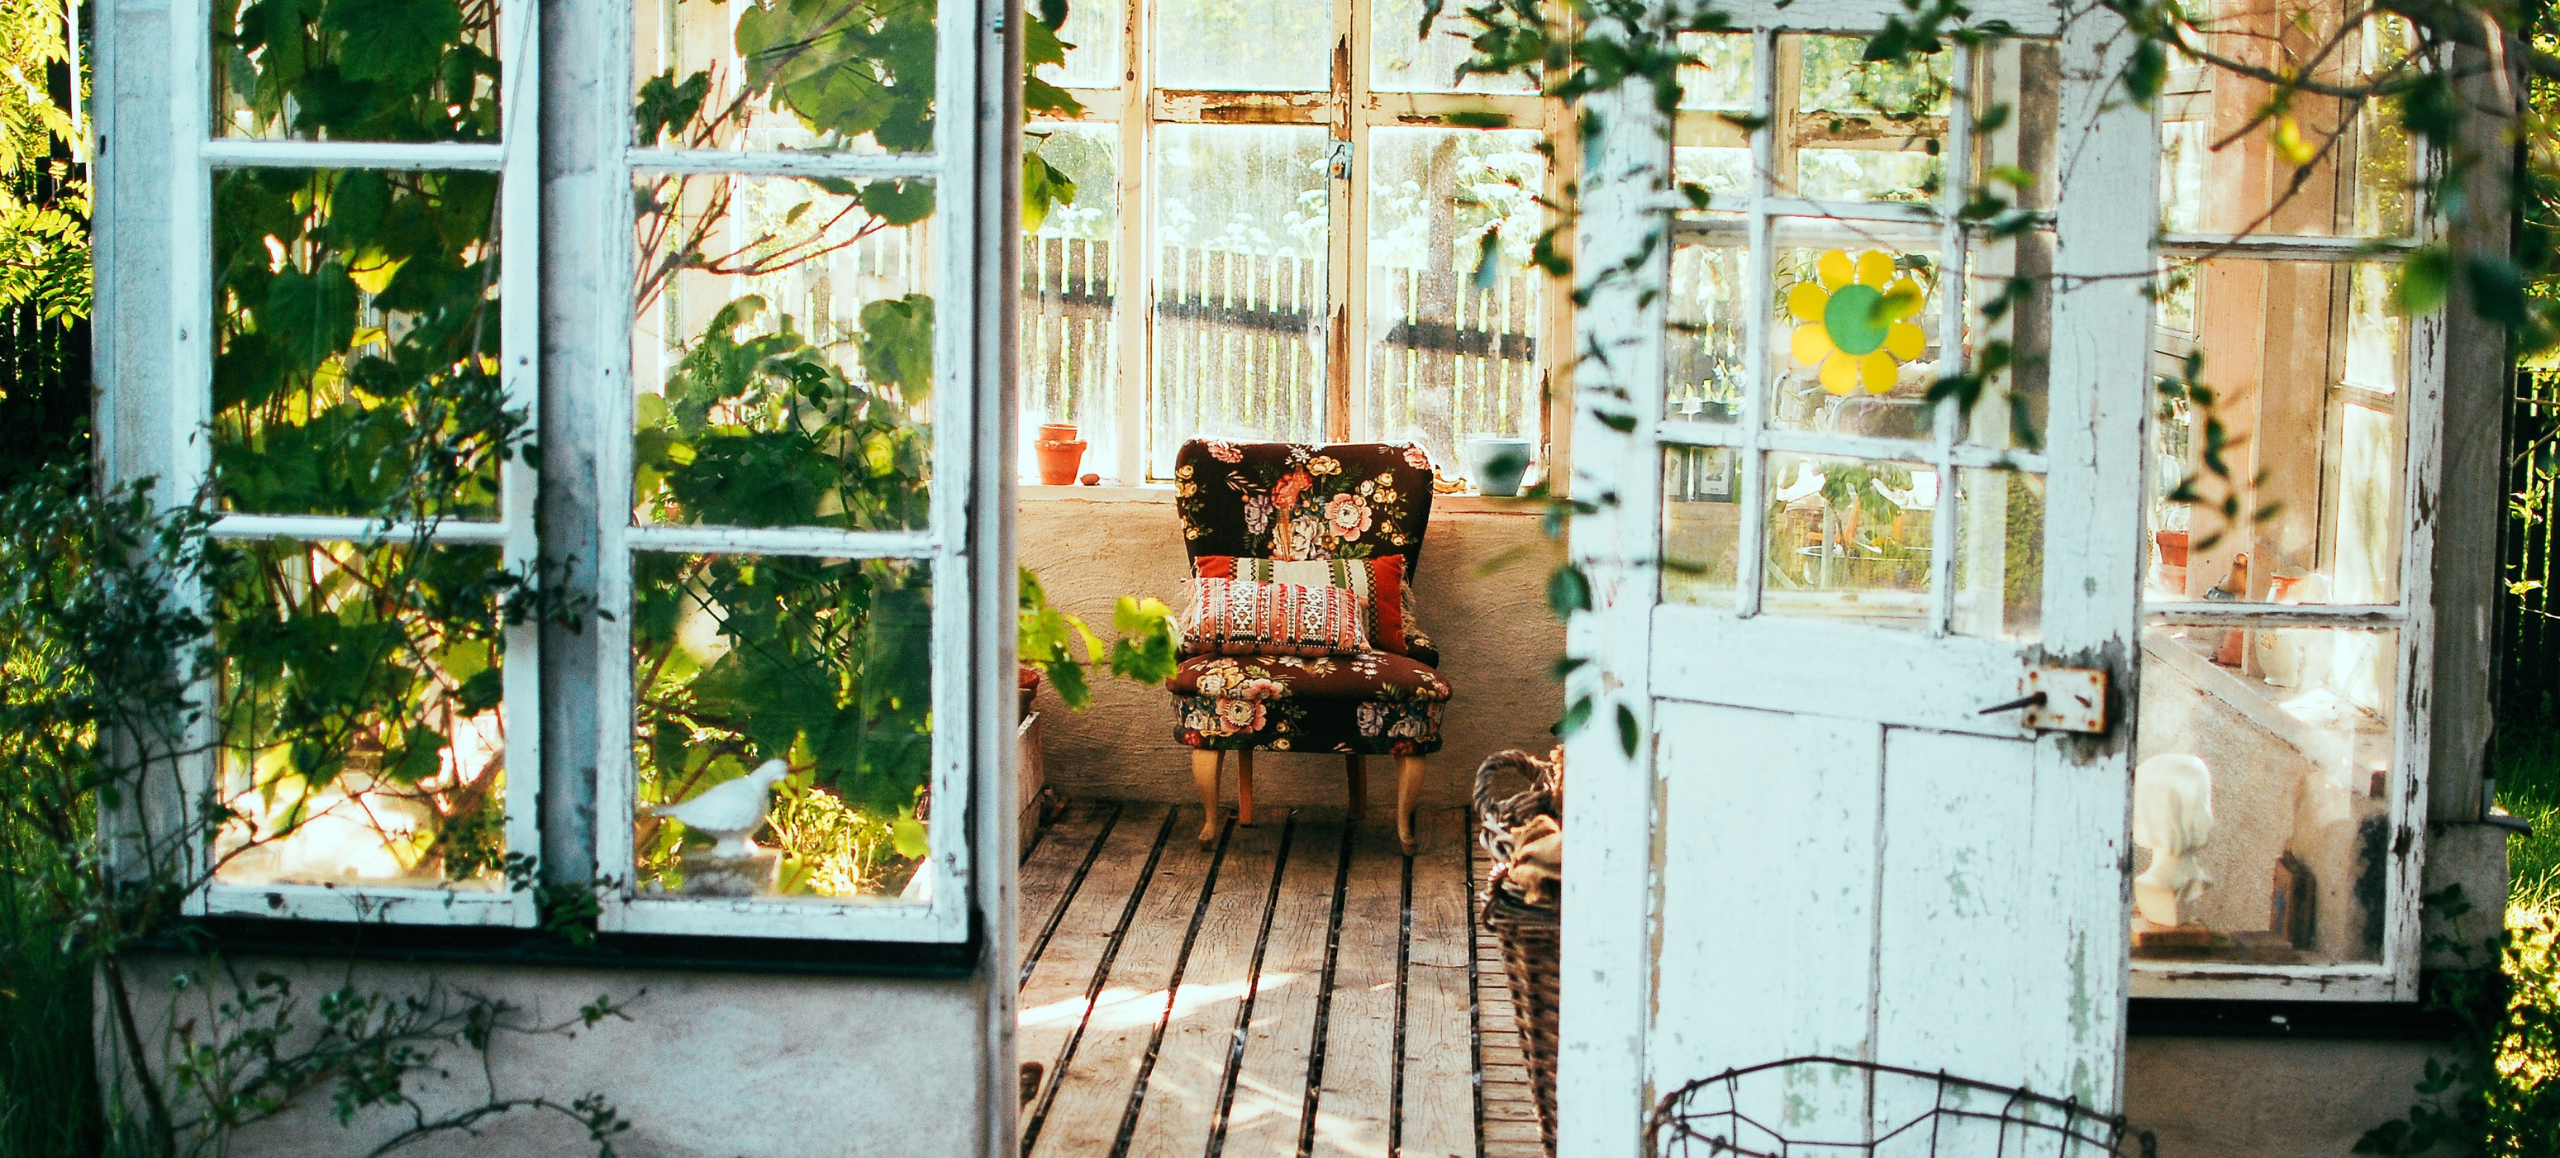 cottage with ivy hanging over white doors and a colorful chair sitting on old wooden floors